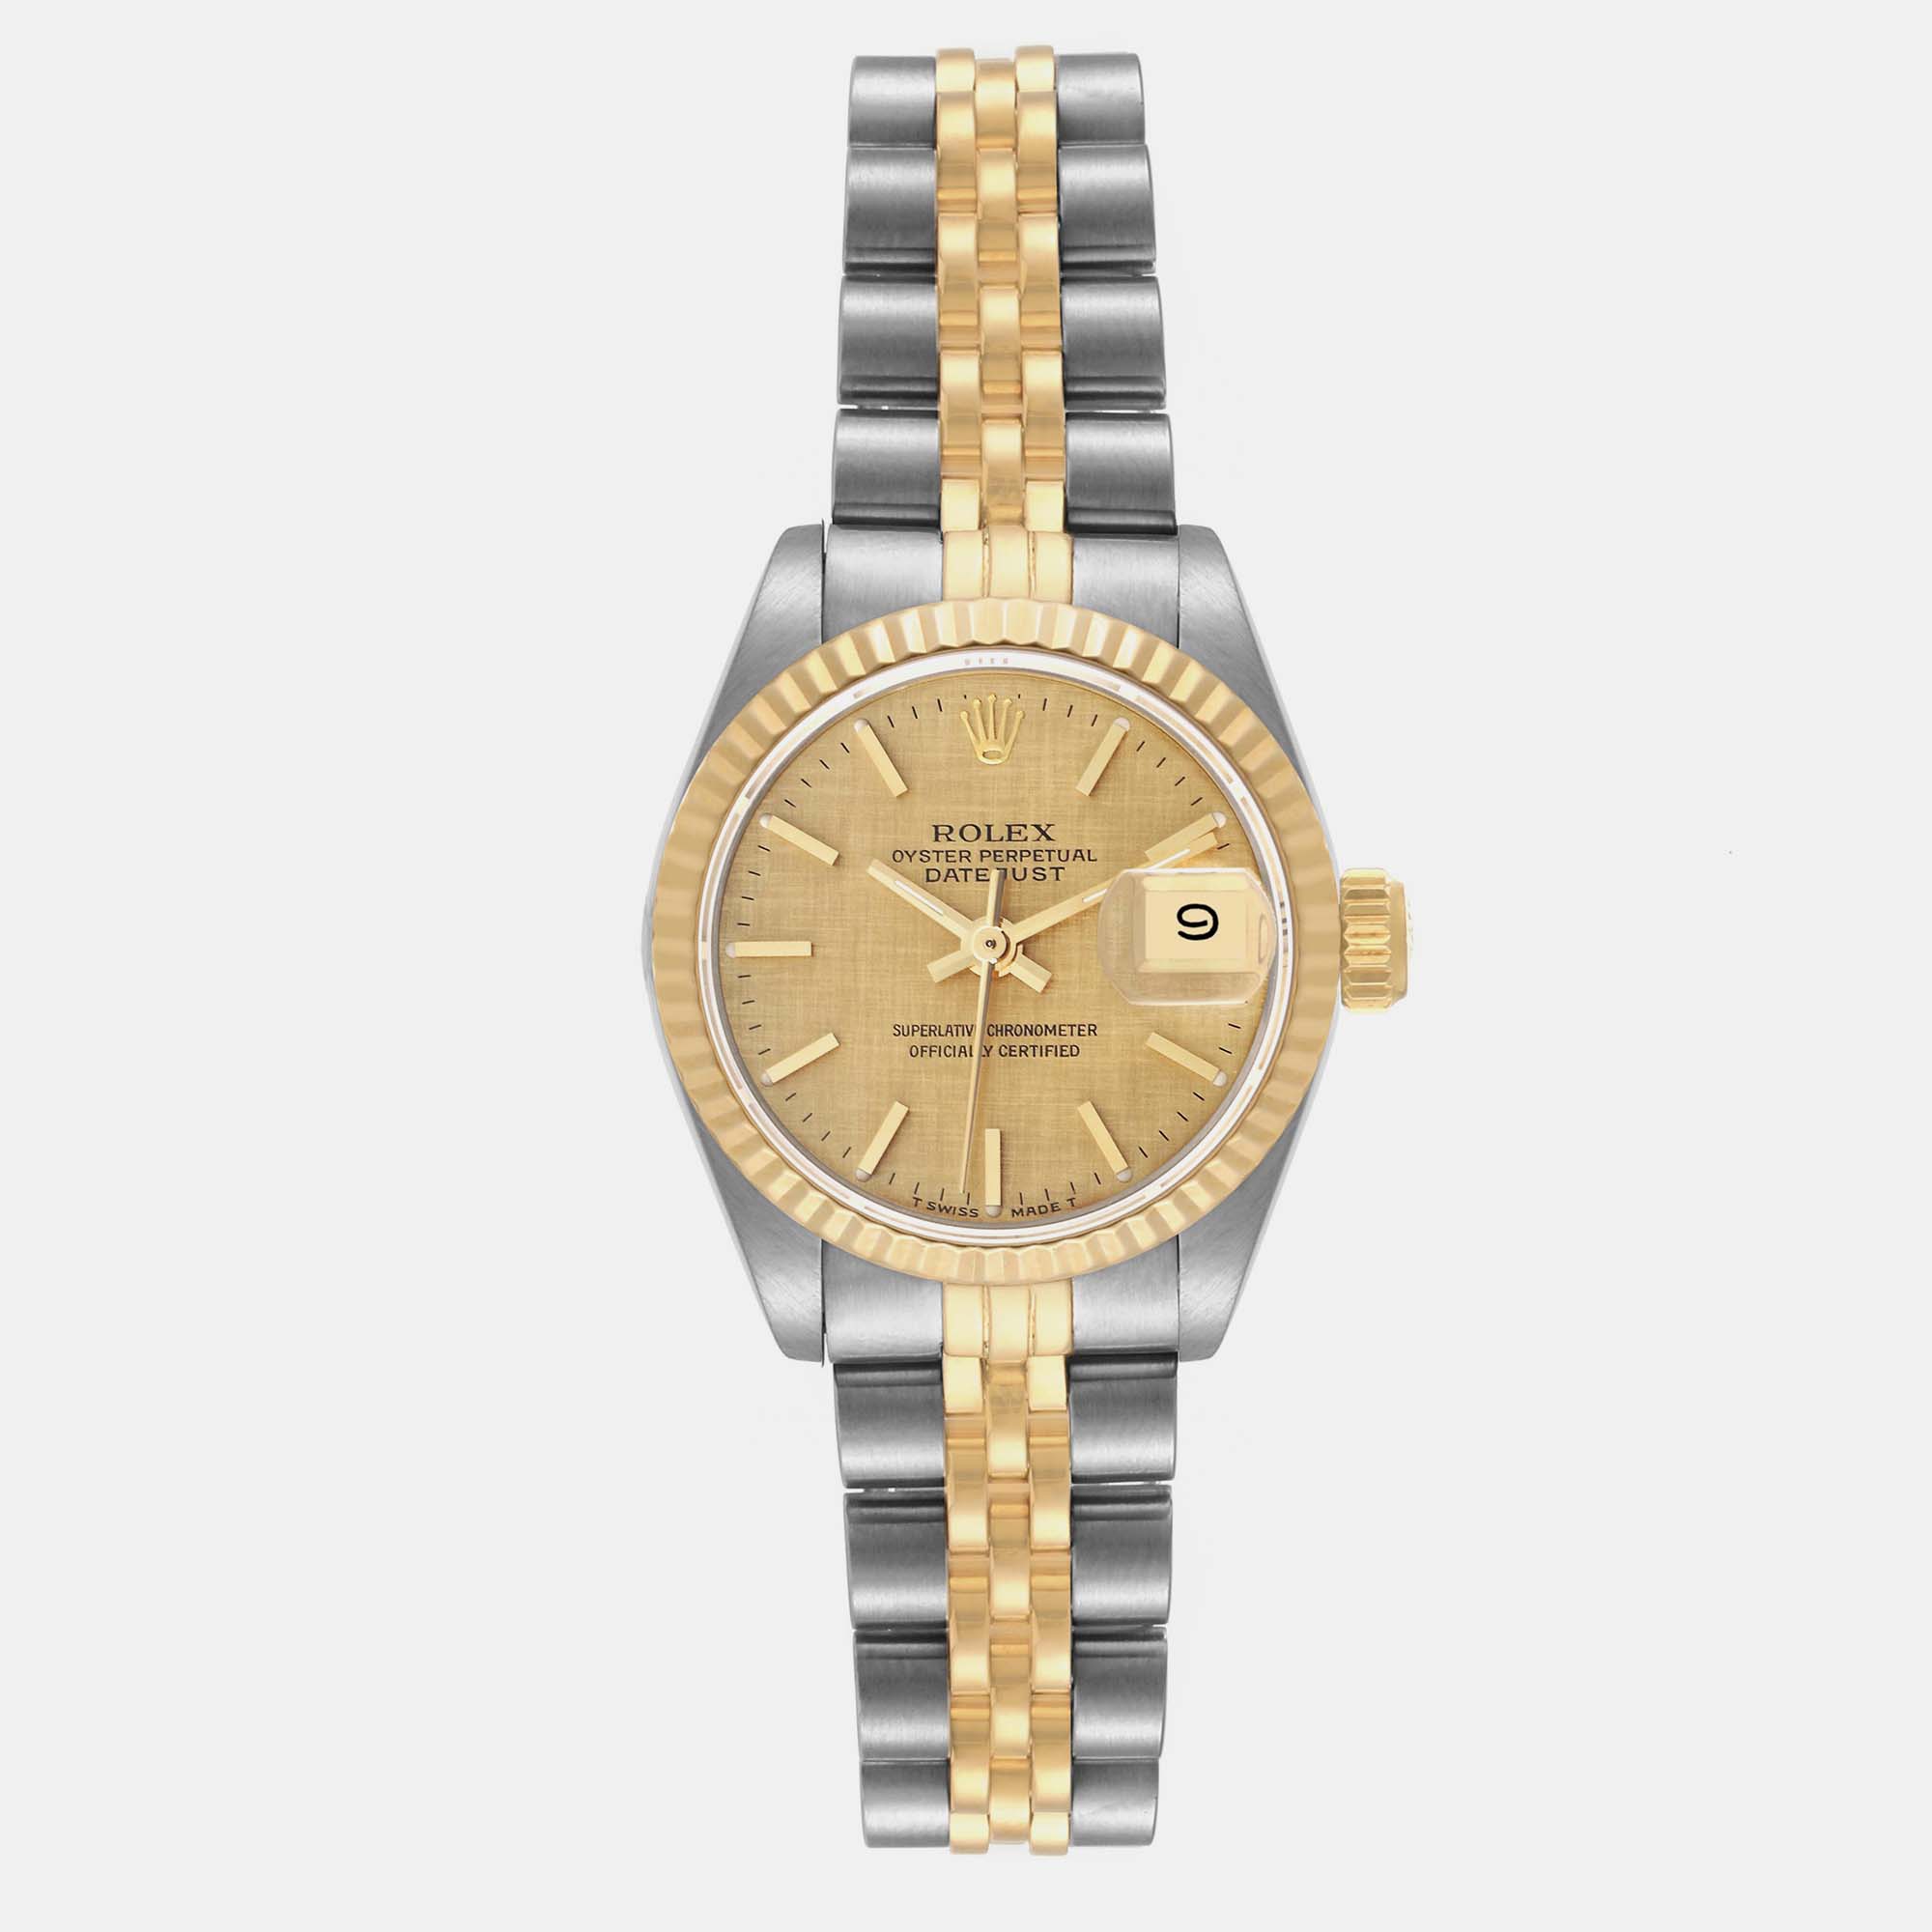 Rolex datejust steel yellow gold champagne linen dial ladies watch 69173 26 mm